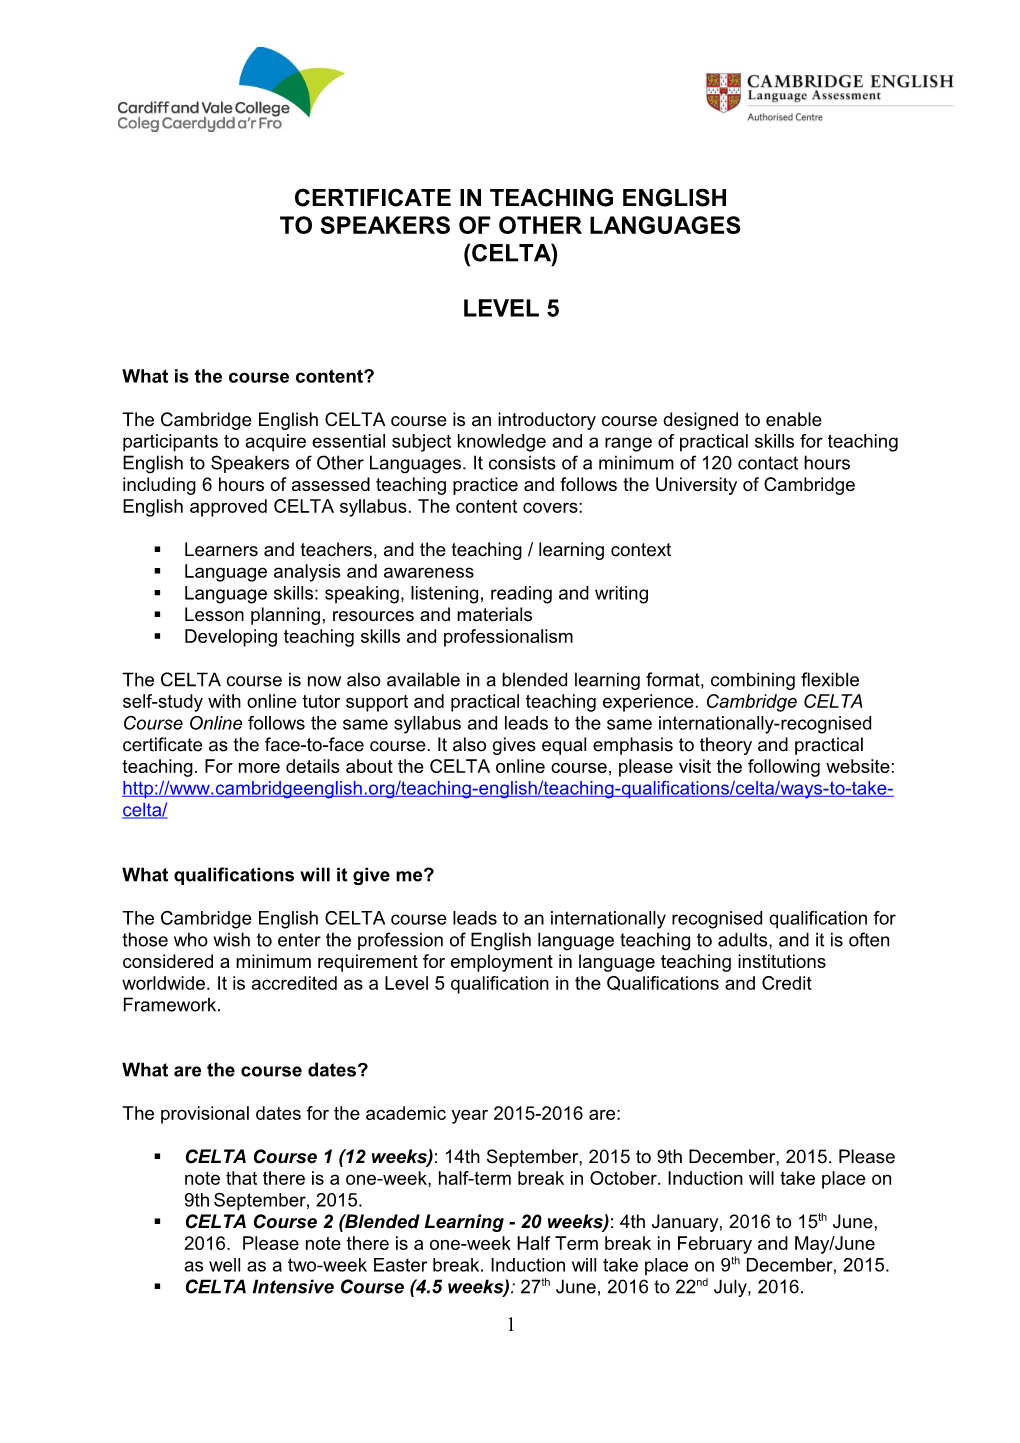 Certificate in Teaching English to Speakers of Other Languages